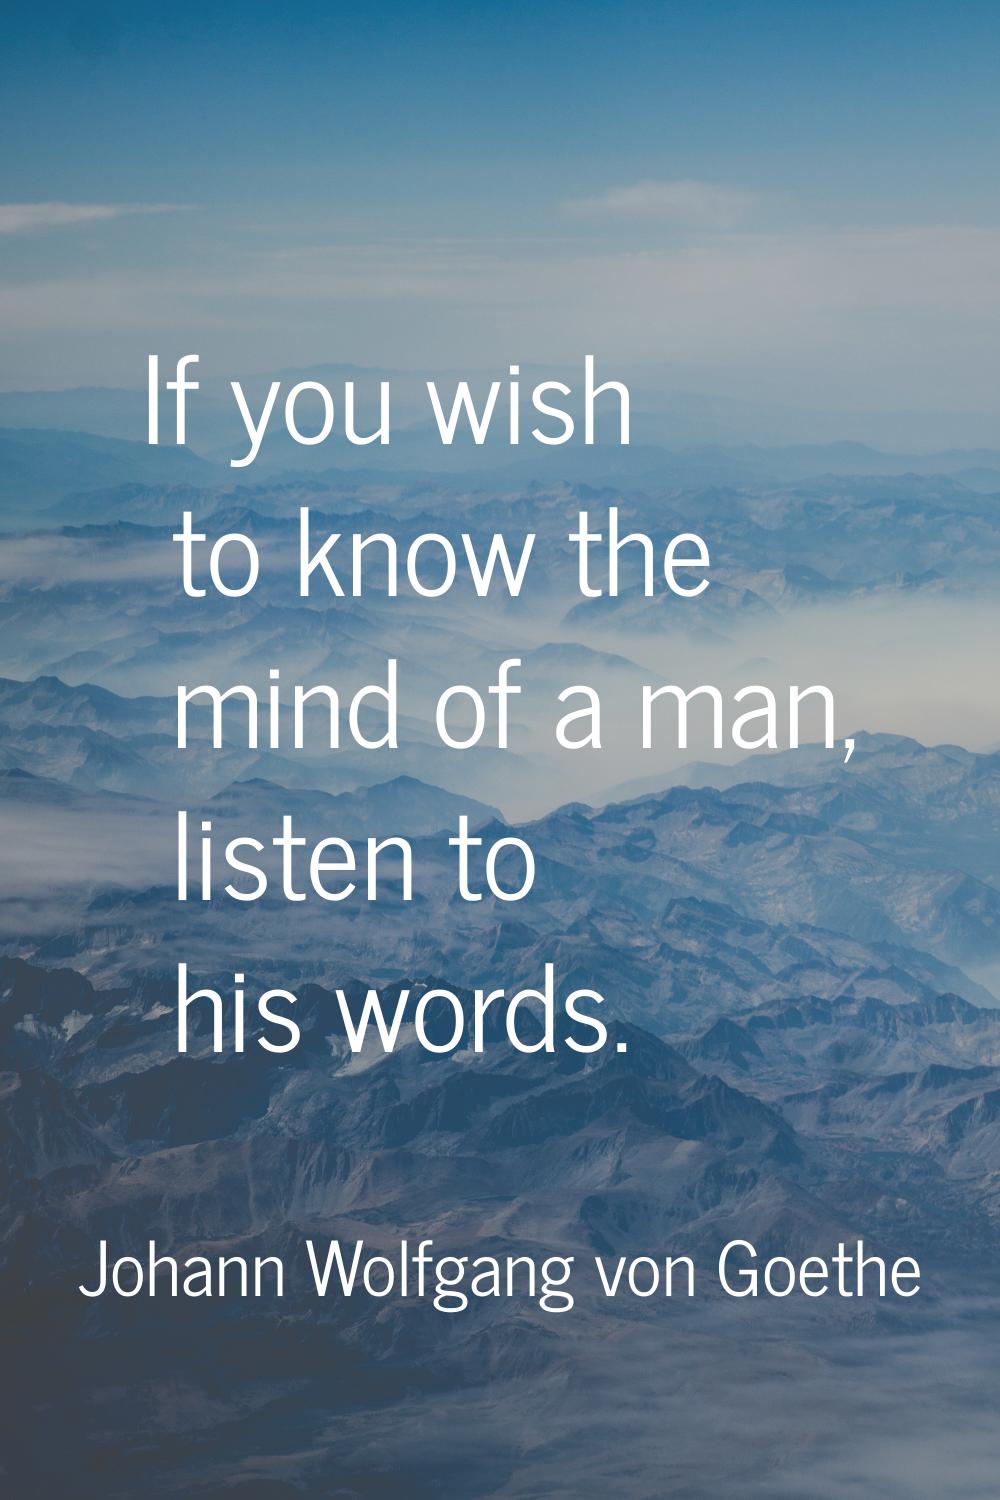 If you wish to know the mind of a man, listen to his words.